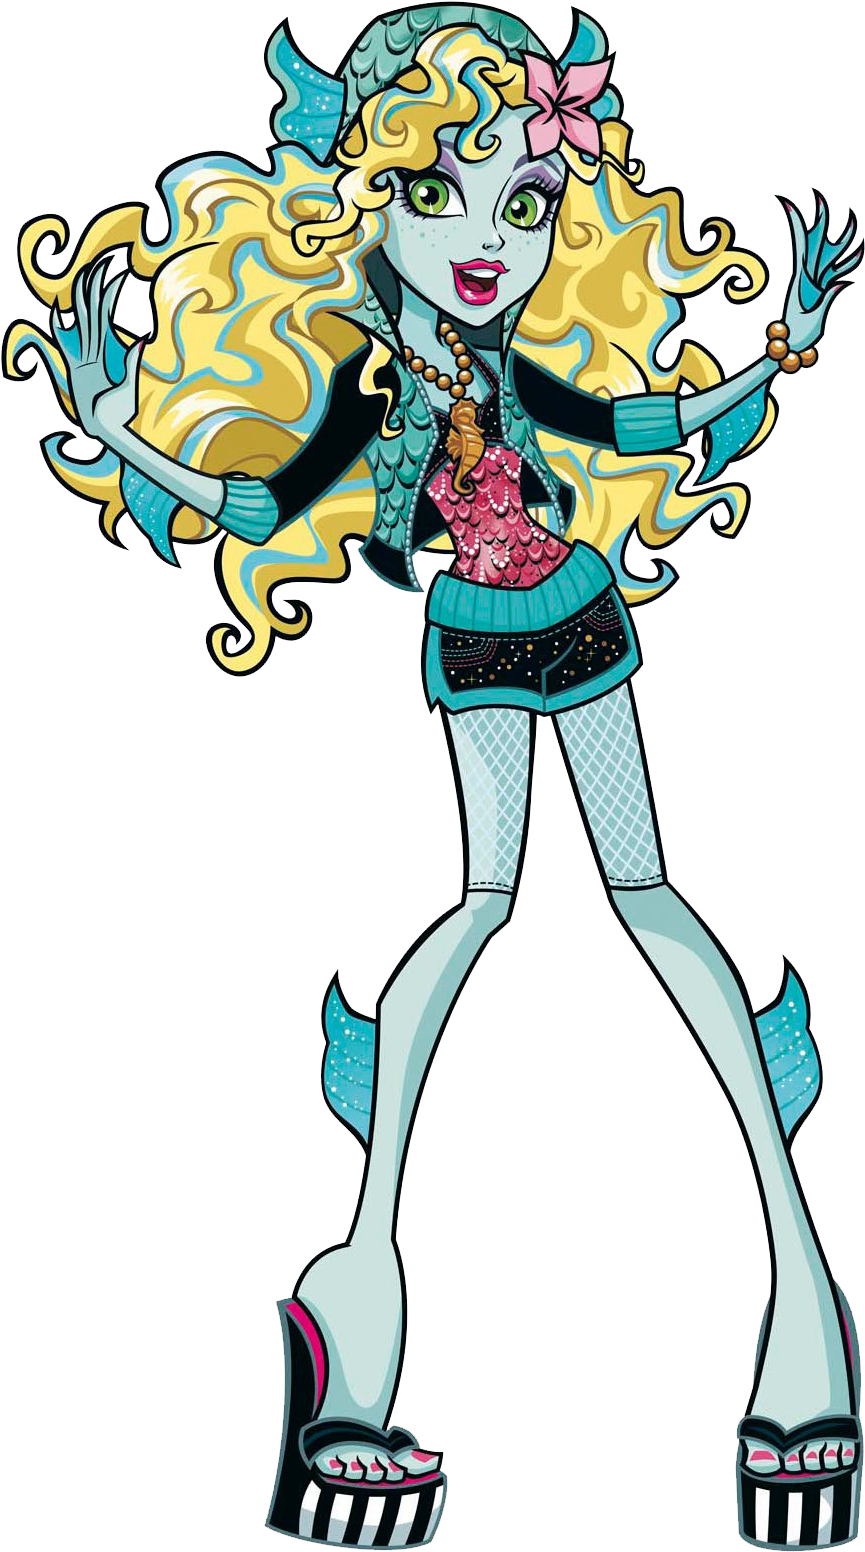 Lagoona Blue Is The Daughter Of A Sea Creature - Lagoona Blue From Monster High (934x1561)